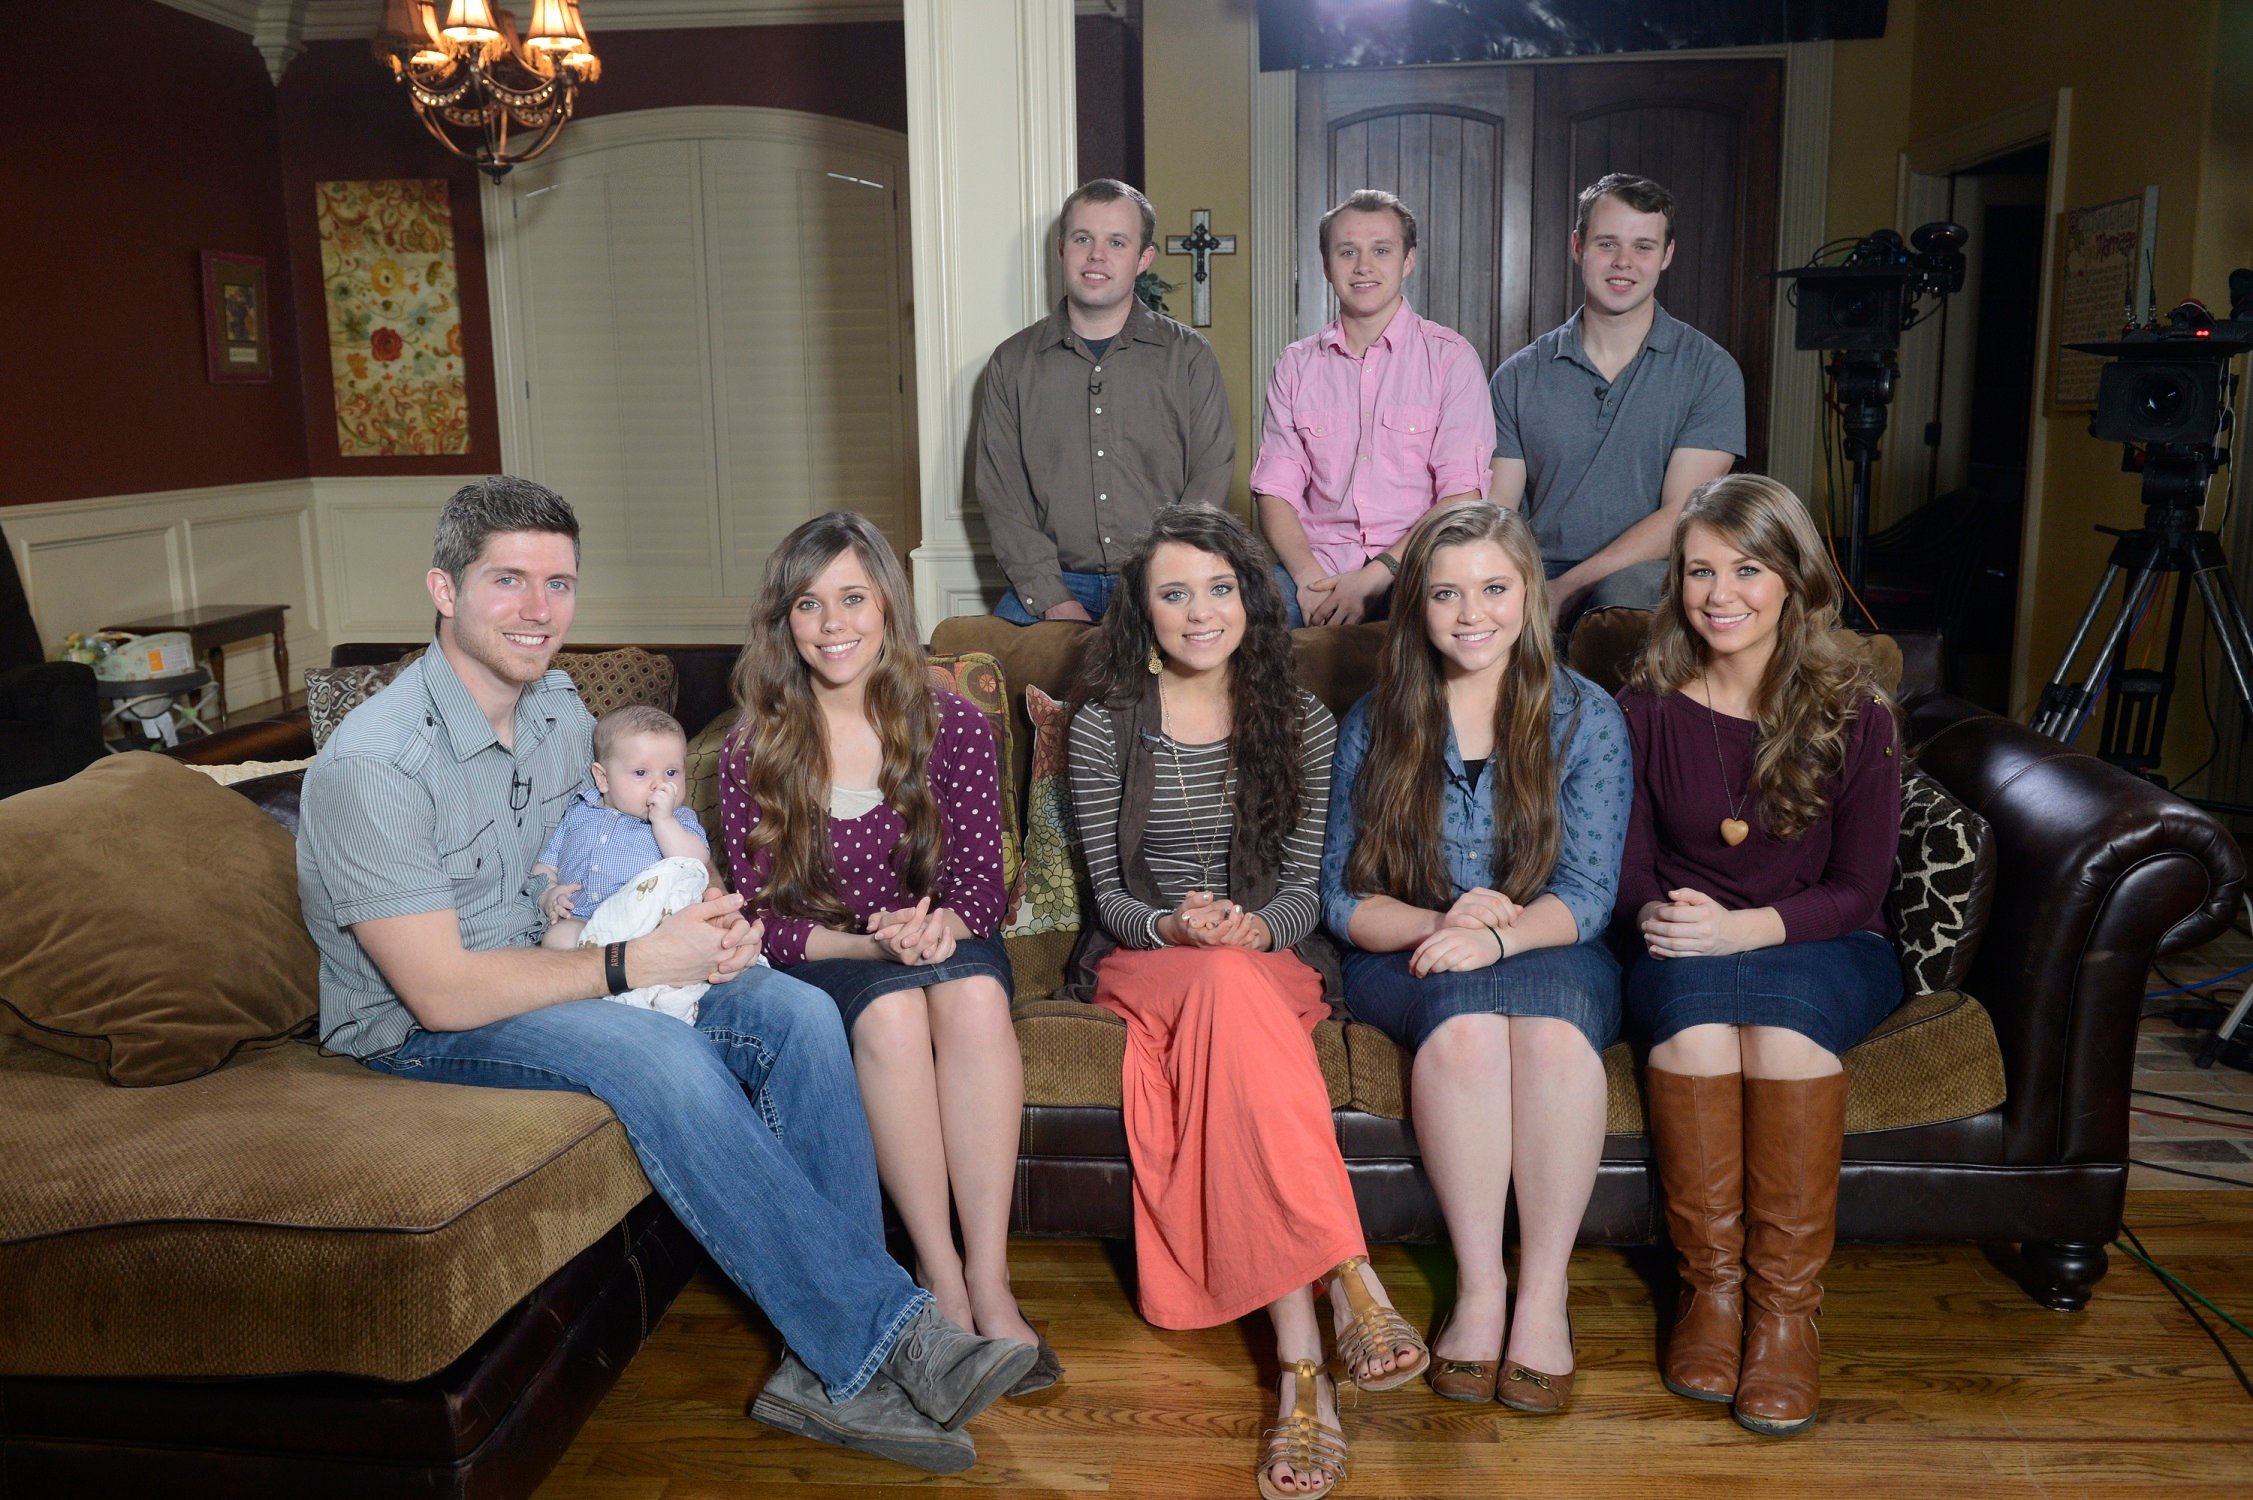 Duggar Family: How Old Was Each of the Duggars When They Got Married?